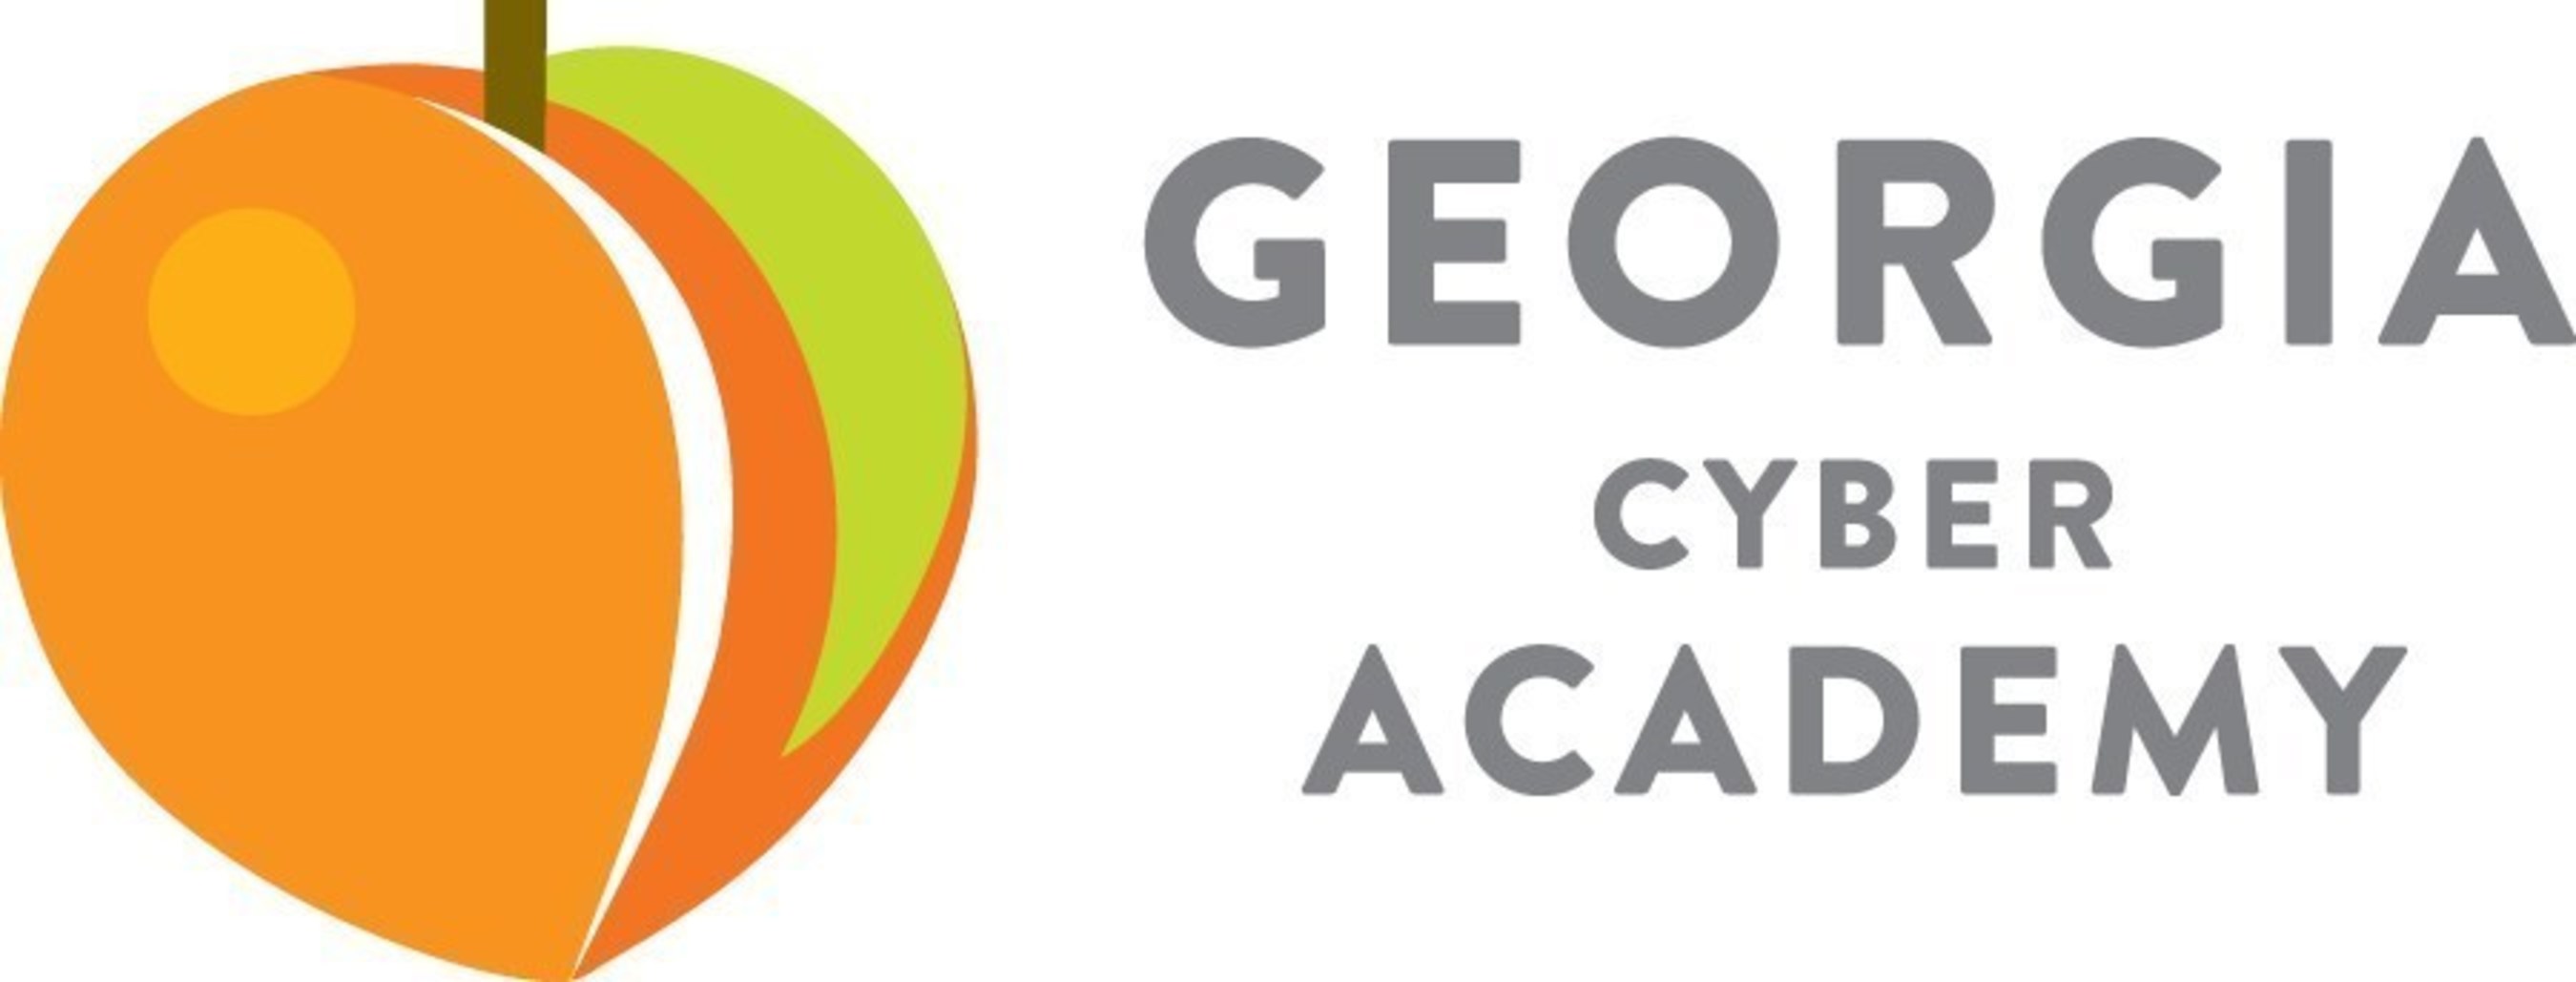 Georgia Cyber Academy Now Accepting Enrollment For Students Seeking Online Education In 2016